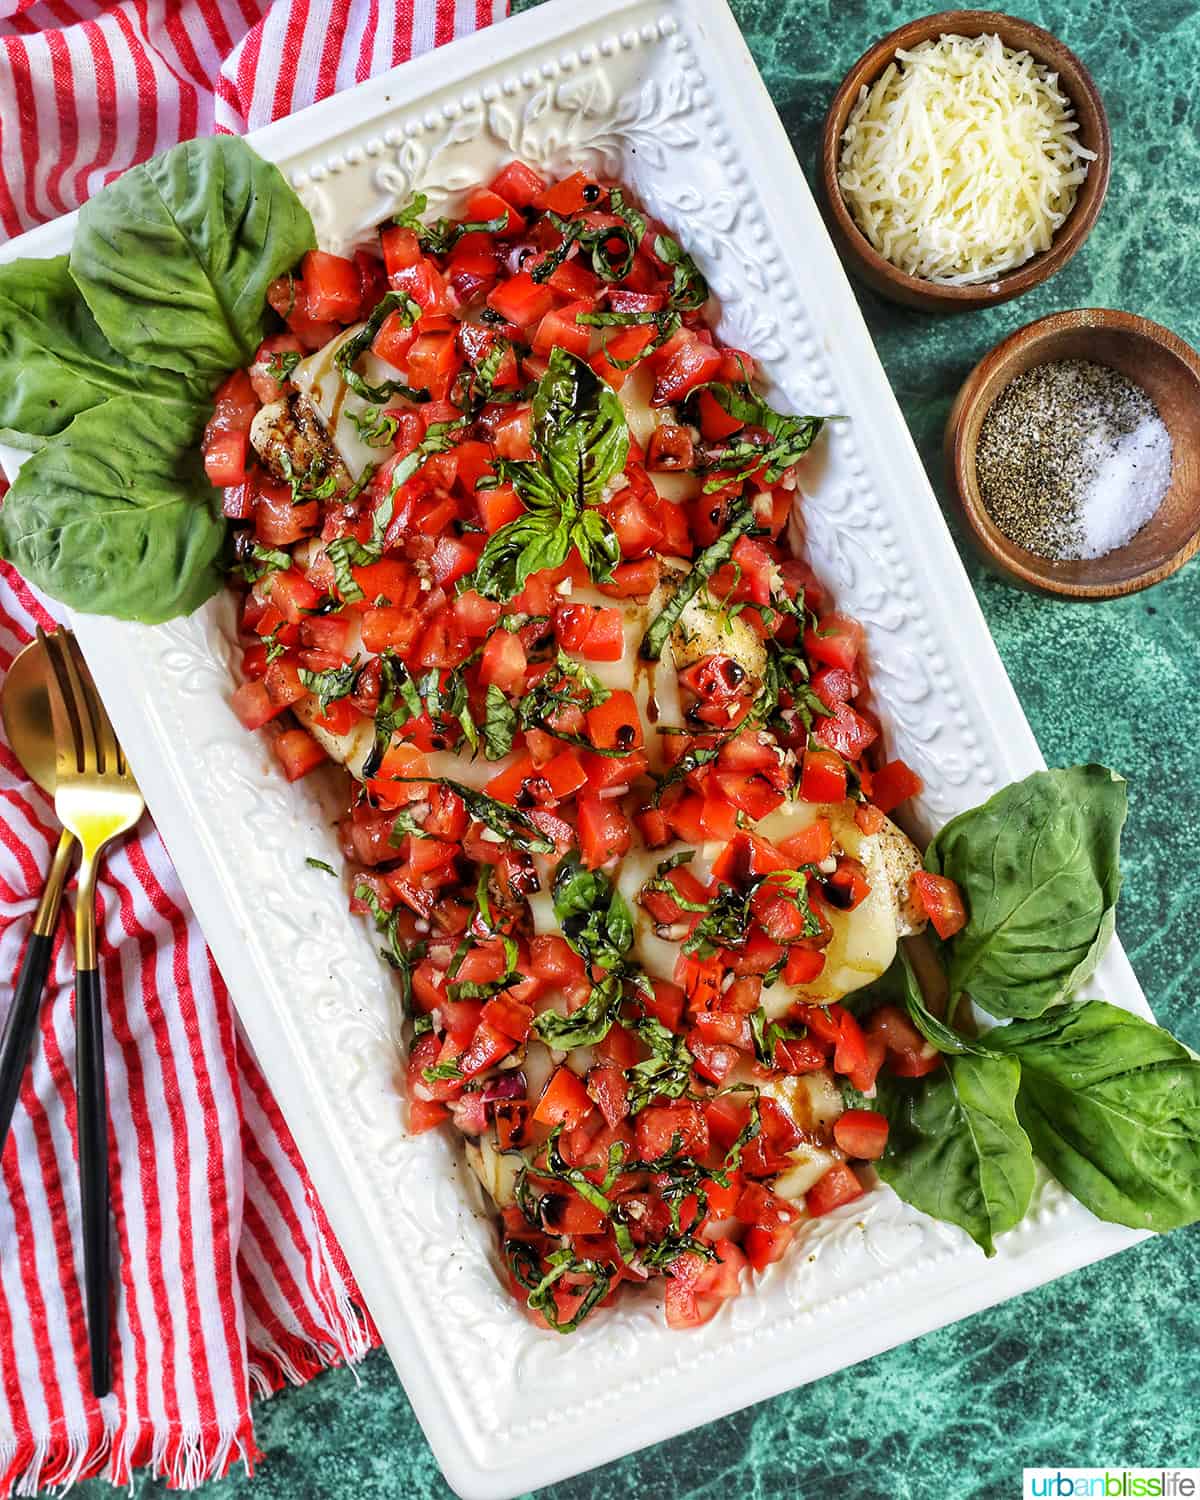 chicken bruschetta with basil leaves in a large white serving platter, with bowl of cheese, utensils on red and white striped napkin, on a green table.